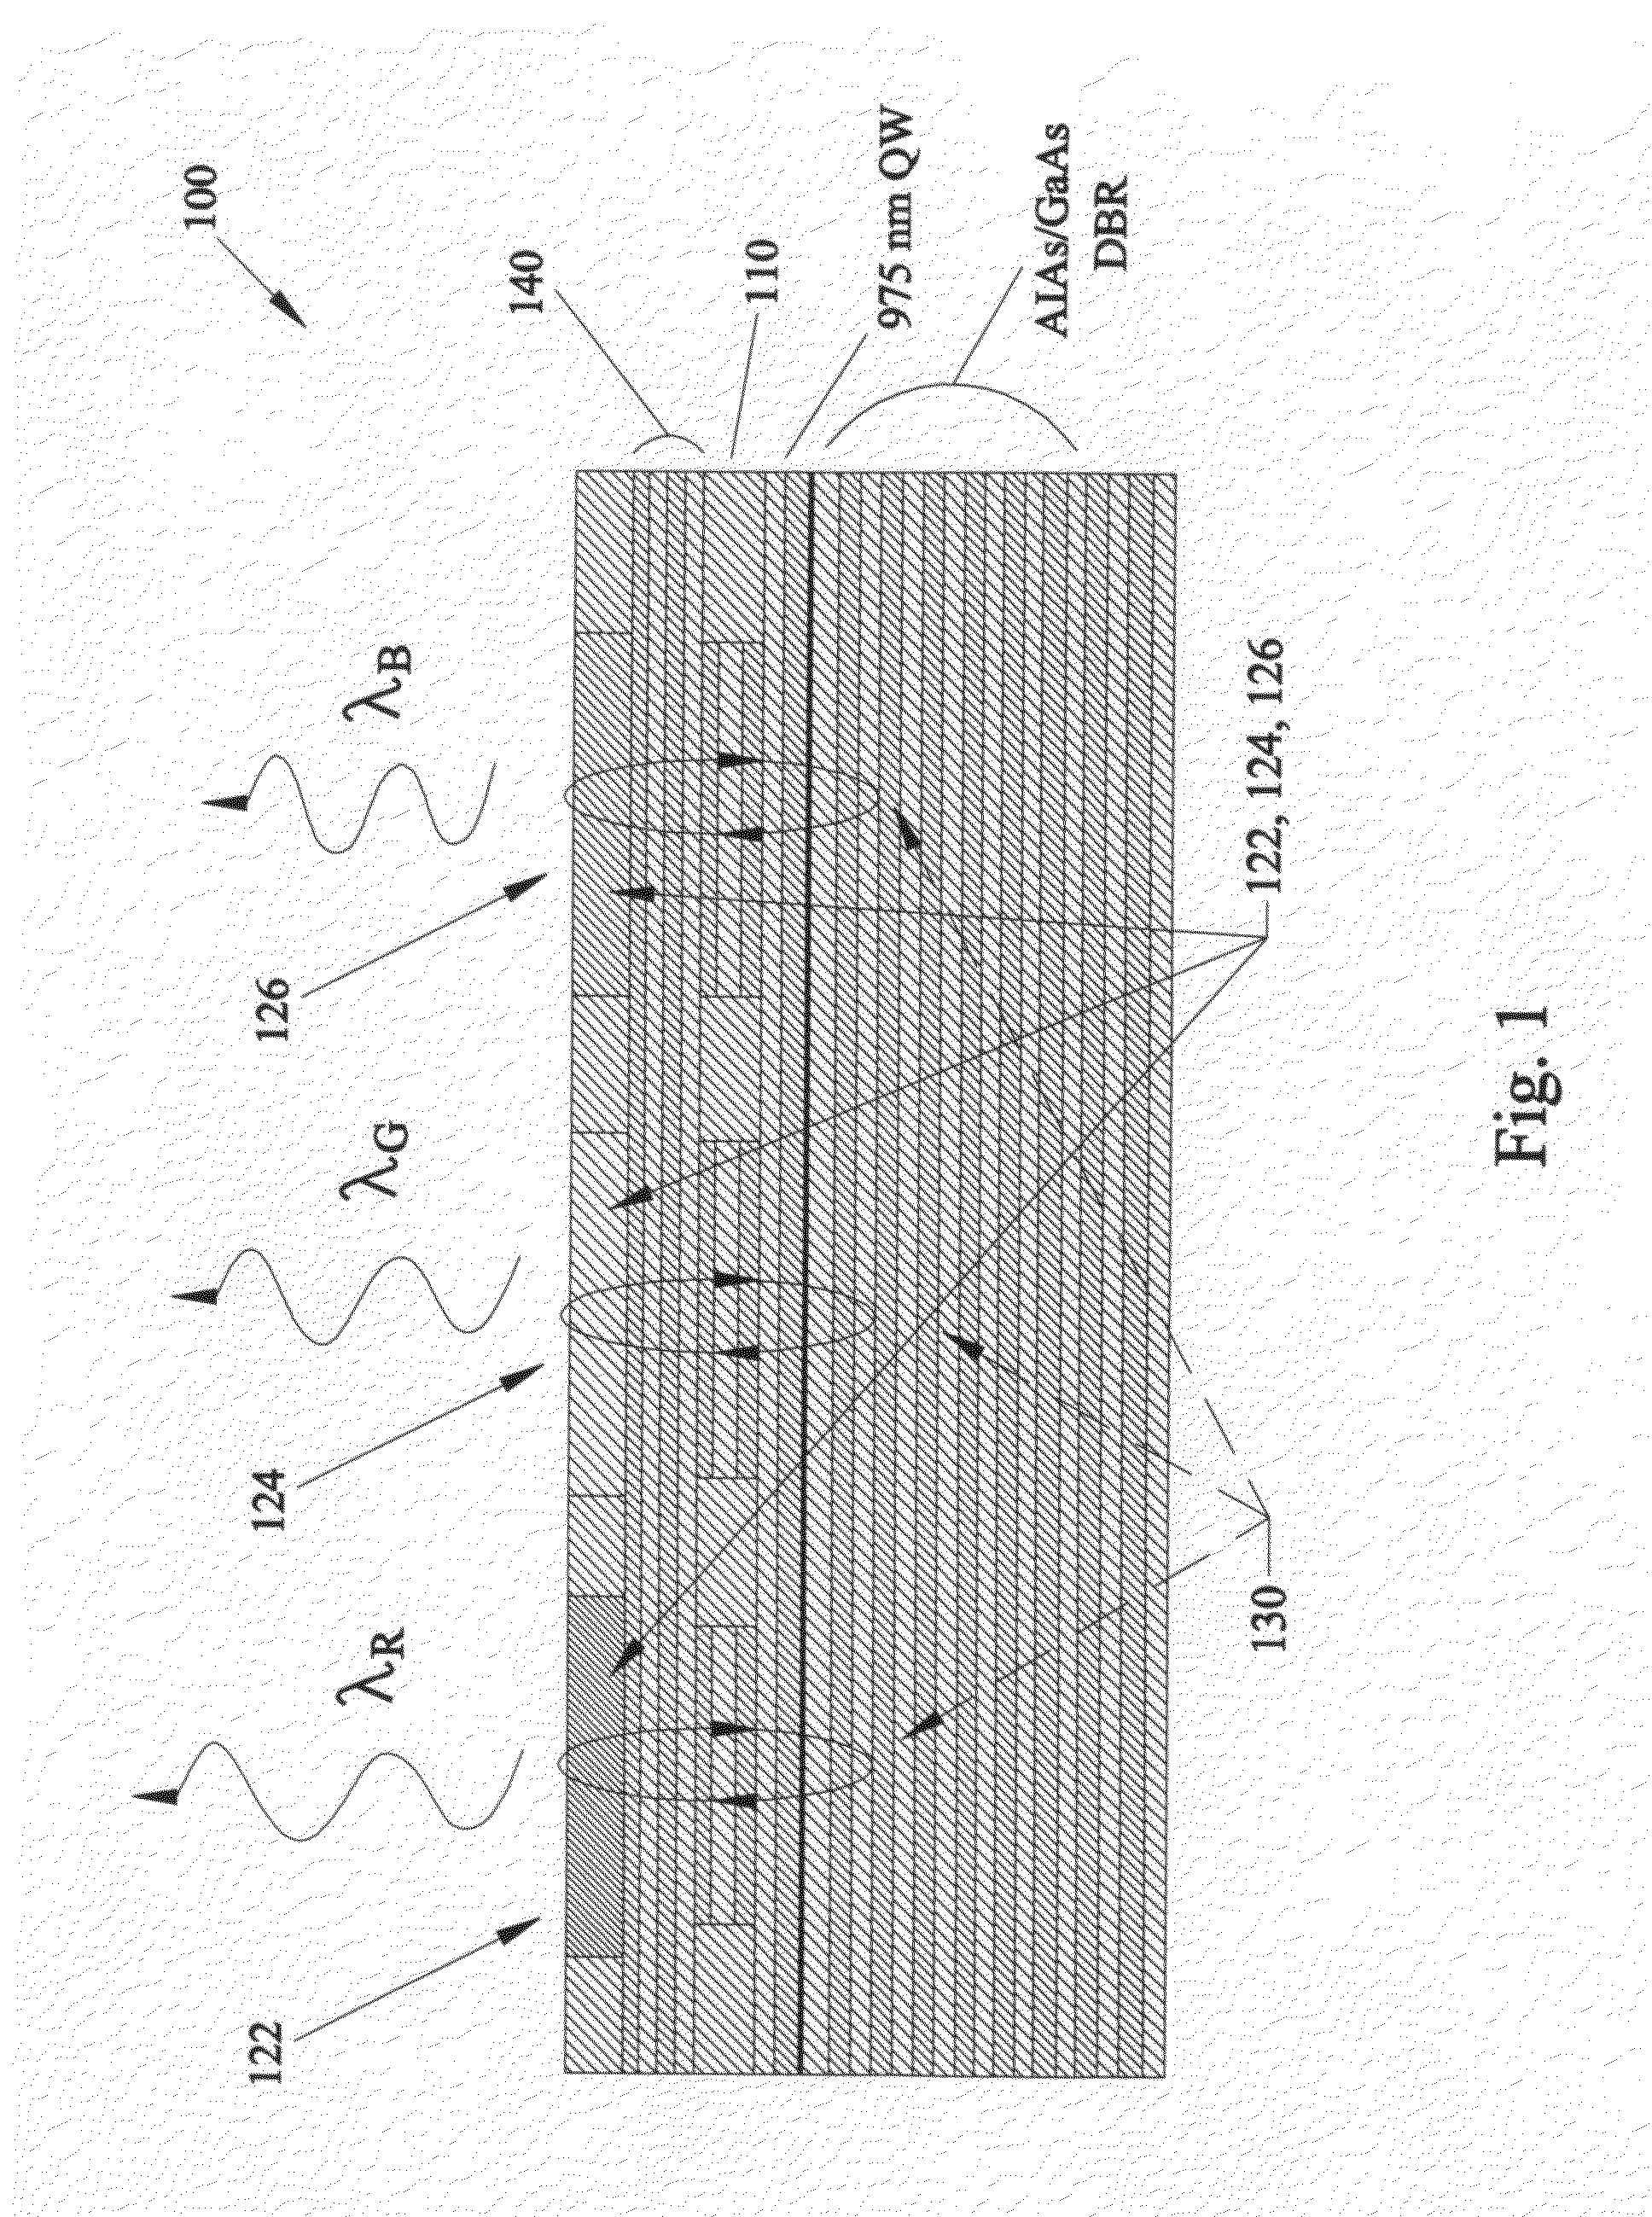 Composite cavity for enhanced efficiency of up-conversion